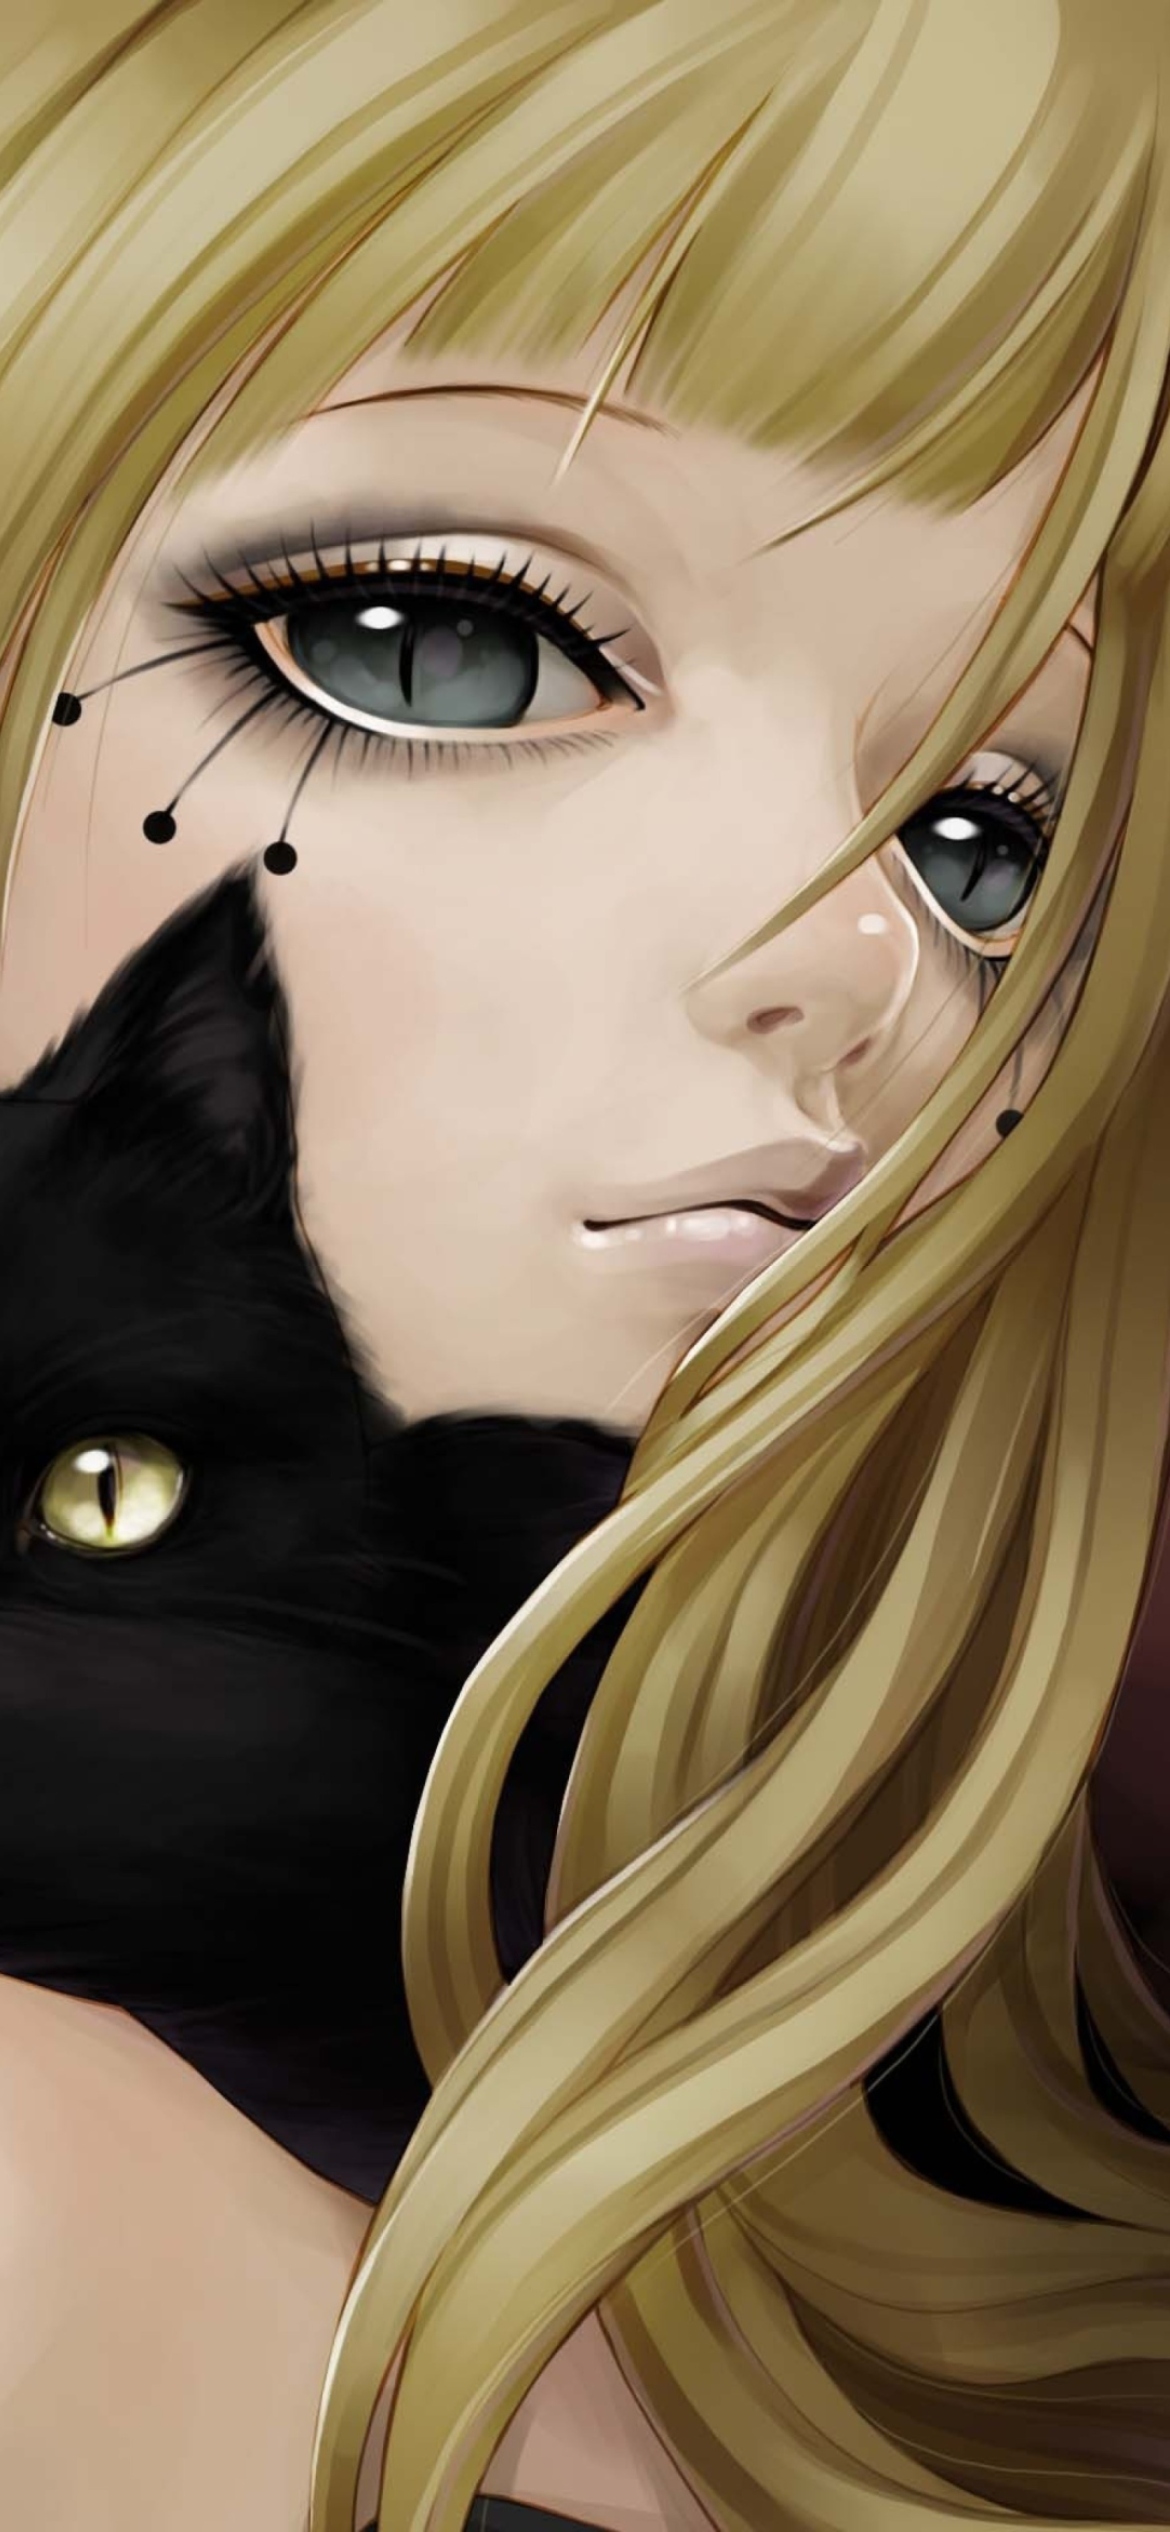 Blonde With Black Cat Drawing wallpaper 1170x2532